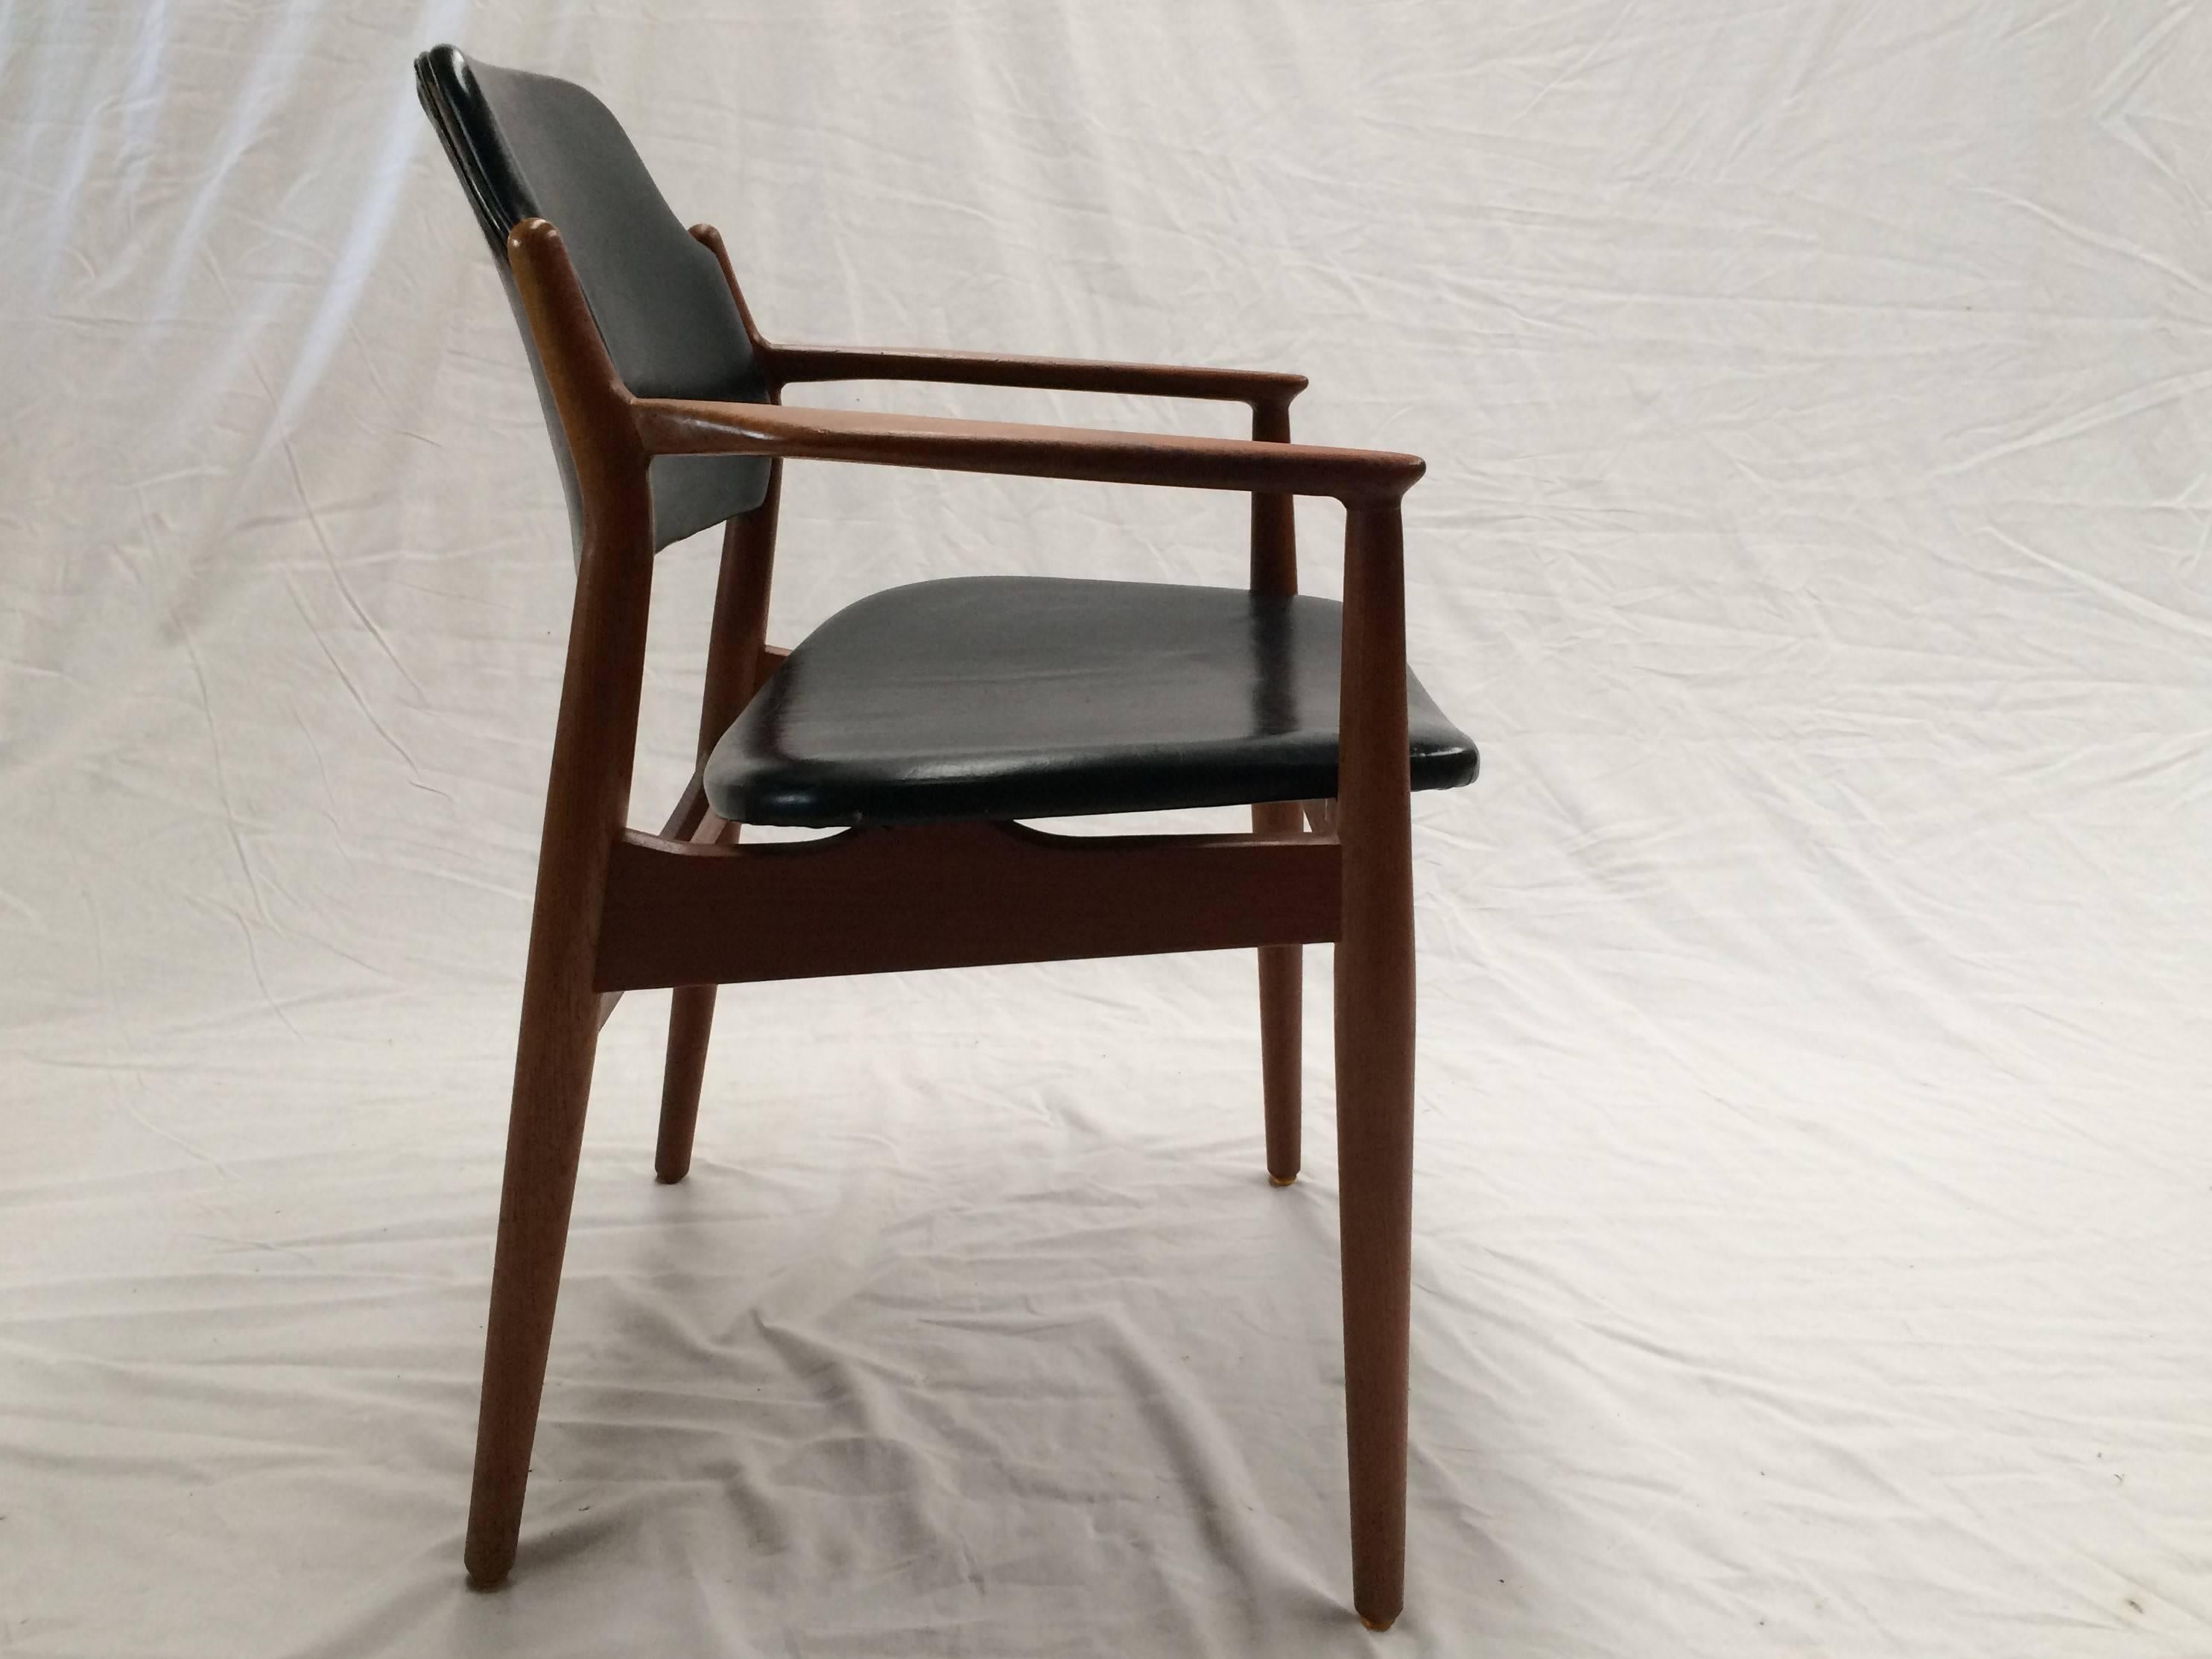 Arne Vodders model 62A armchair was designed in 1961 for Sibast Møbler.

The comfortable armchair in teak is in very good condition with refinished frame and original leather upholstery. The chair is evidence of what good designers and skilled